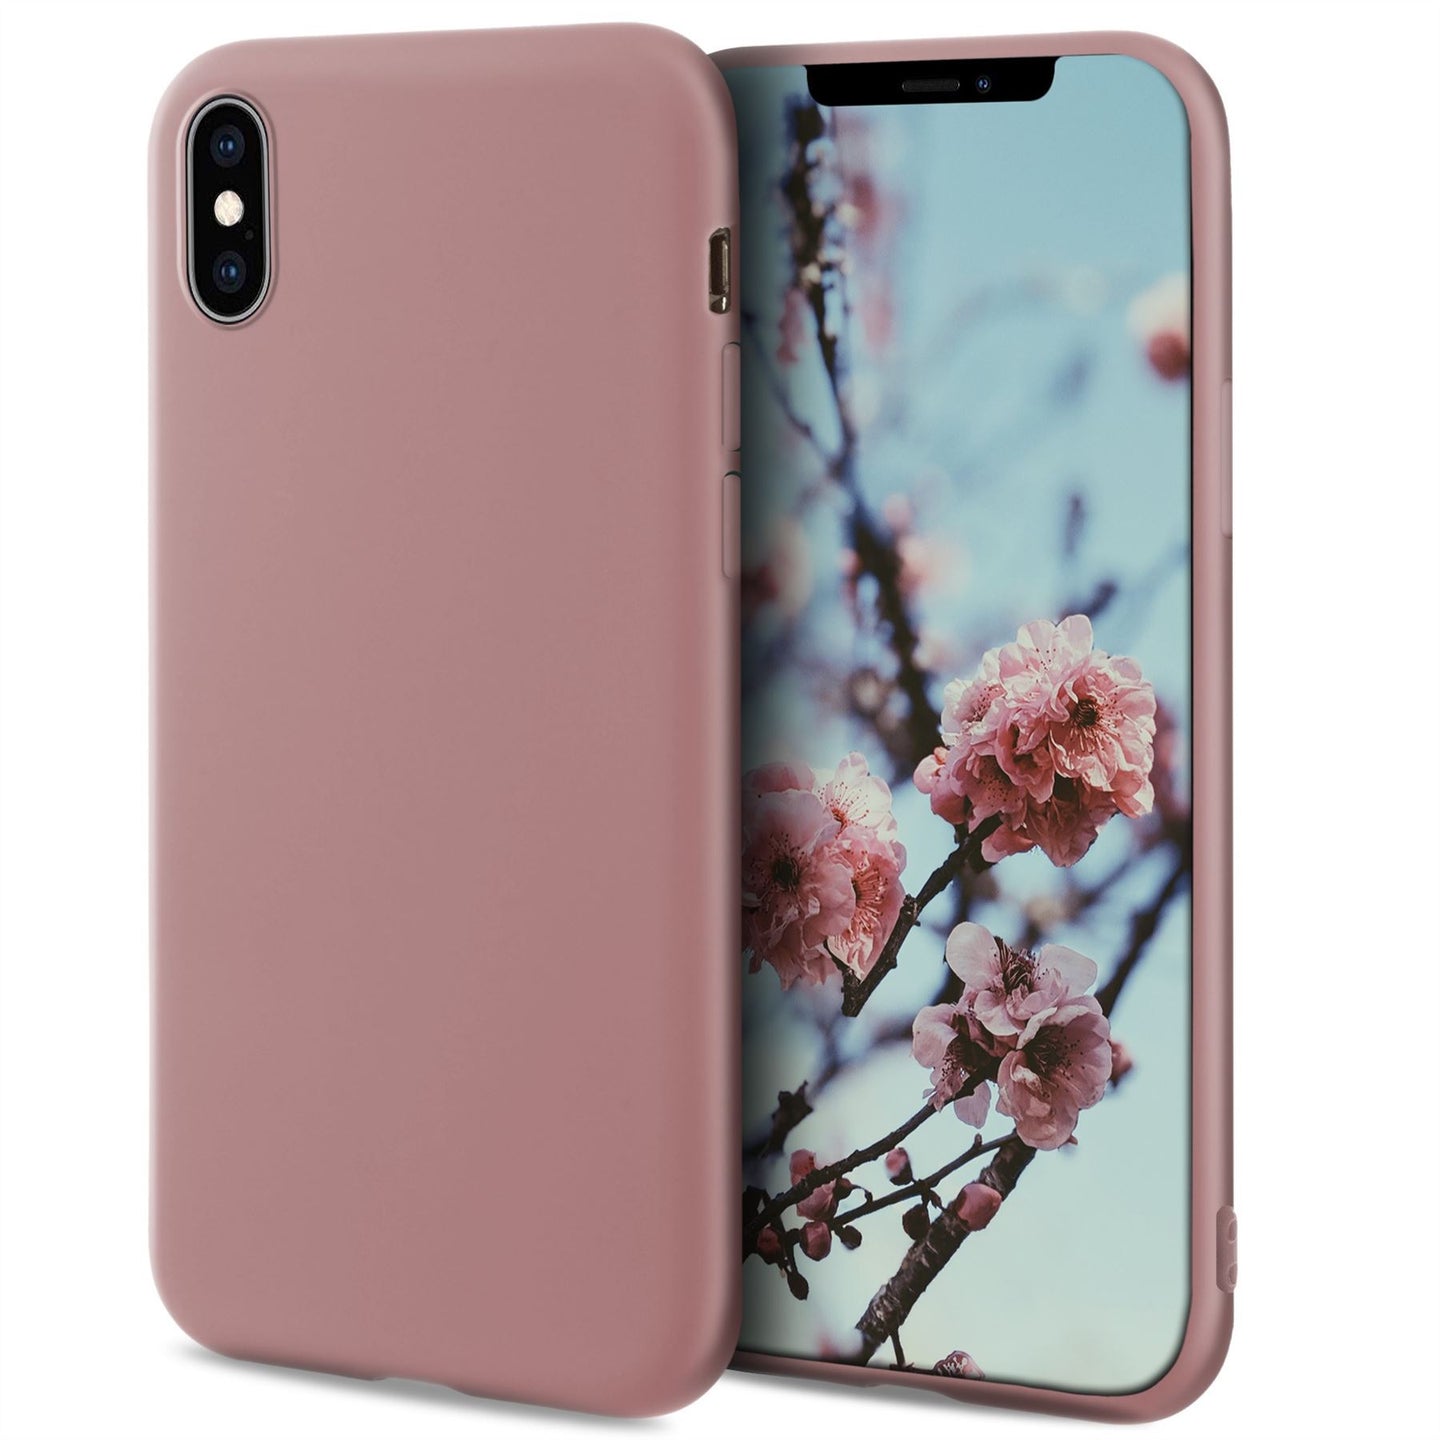 Moozy Minimalist Series Silicone Case for iPhone X and iPhone XS, Rose Beige - Matte Finish Slim Soft TPU Cover